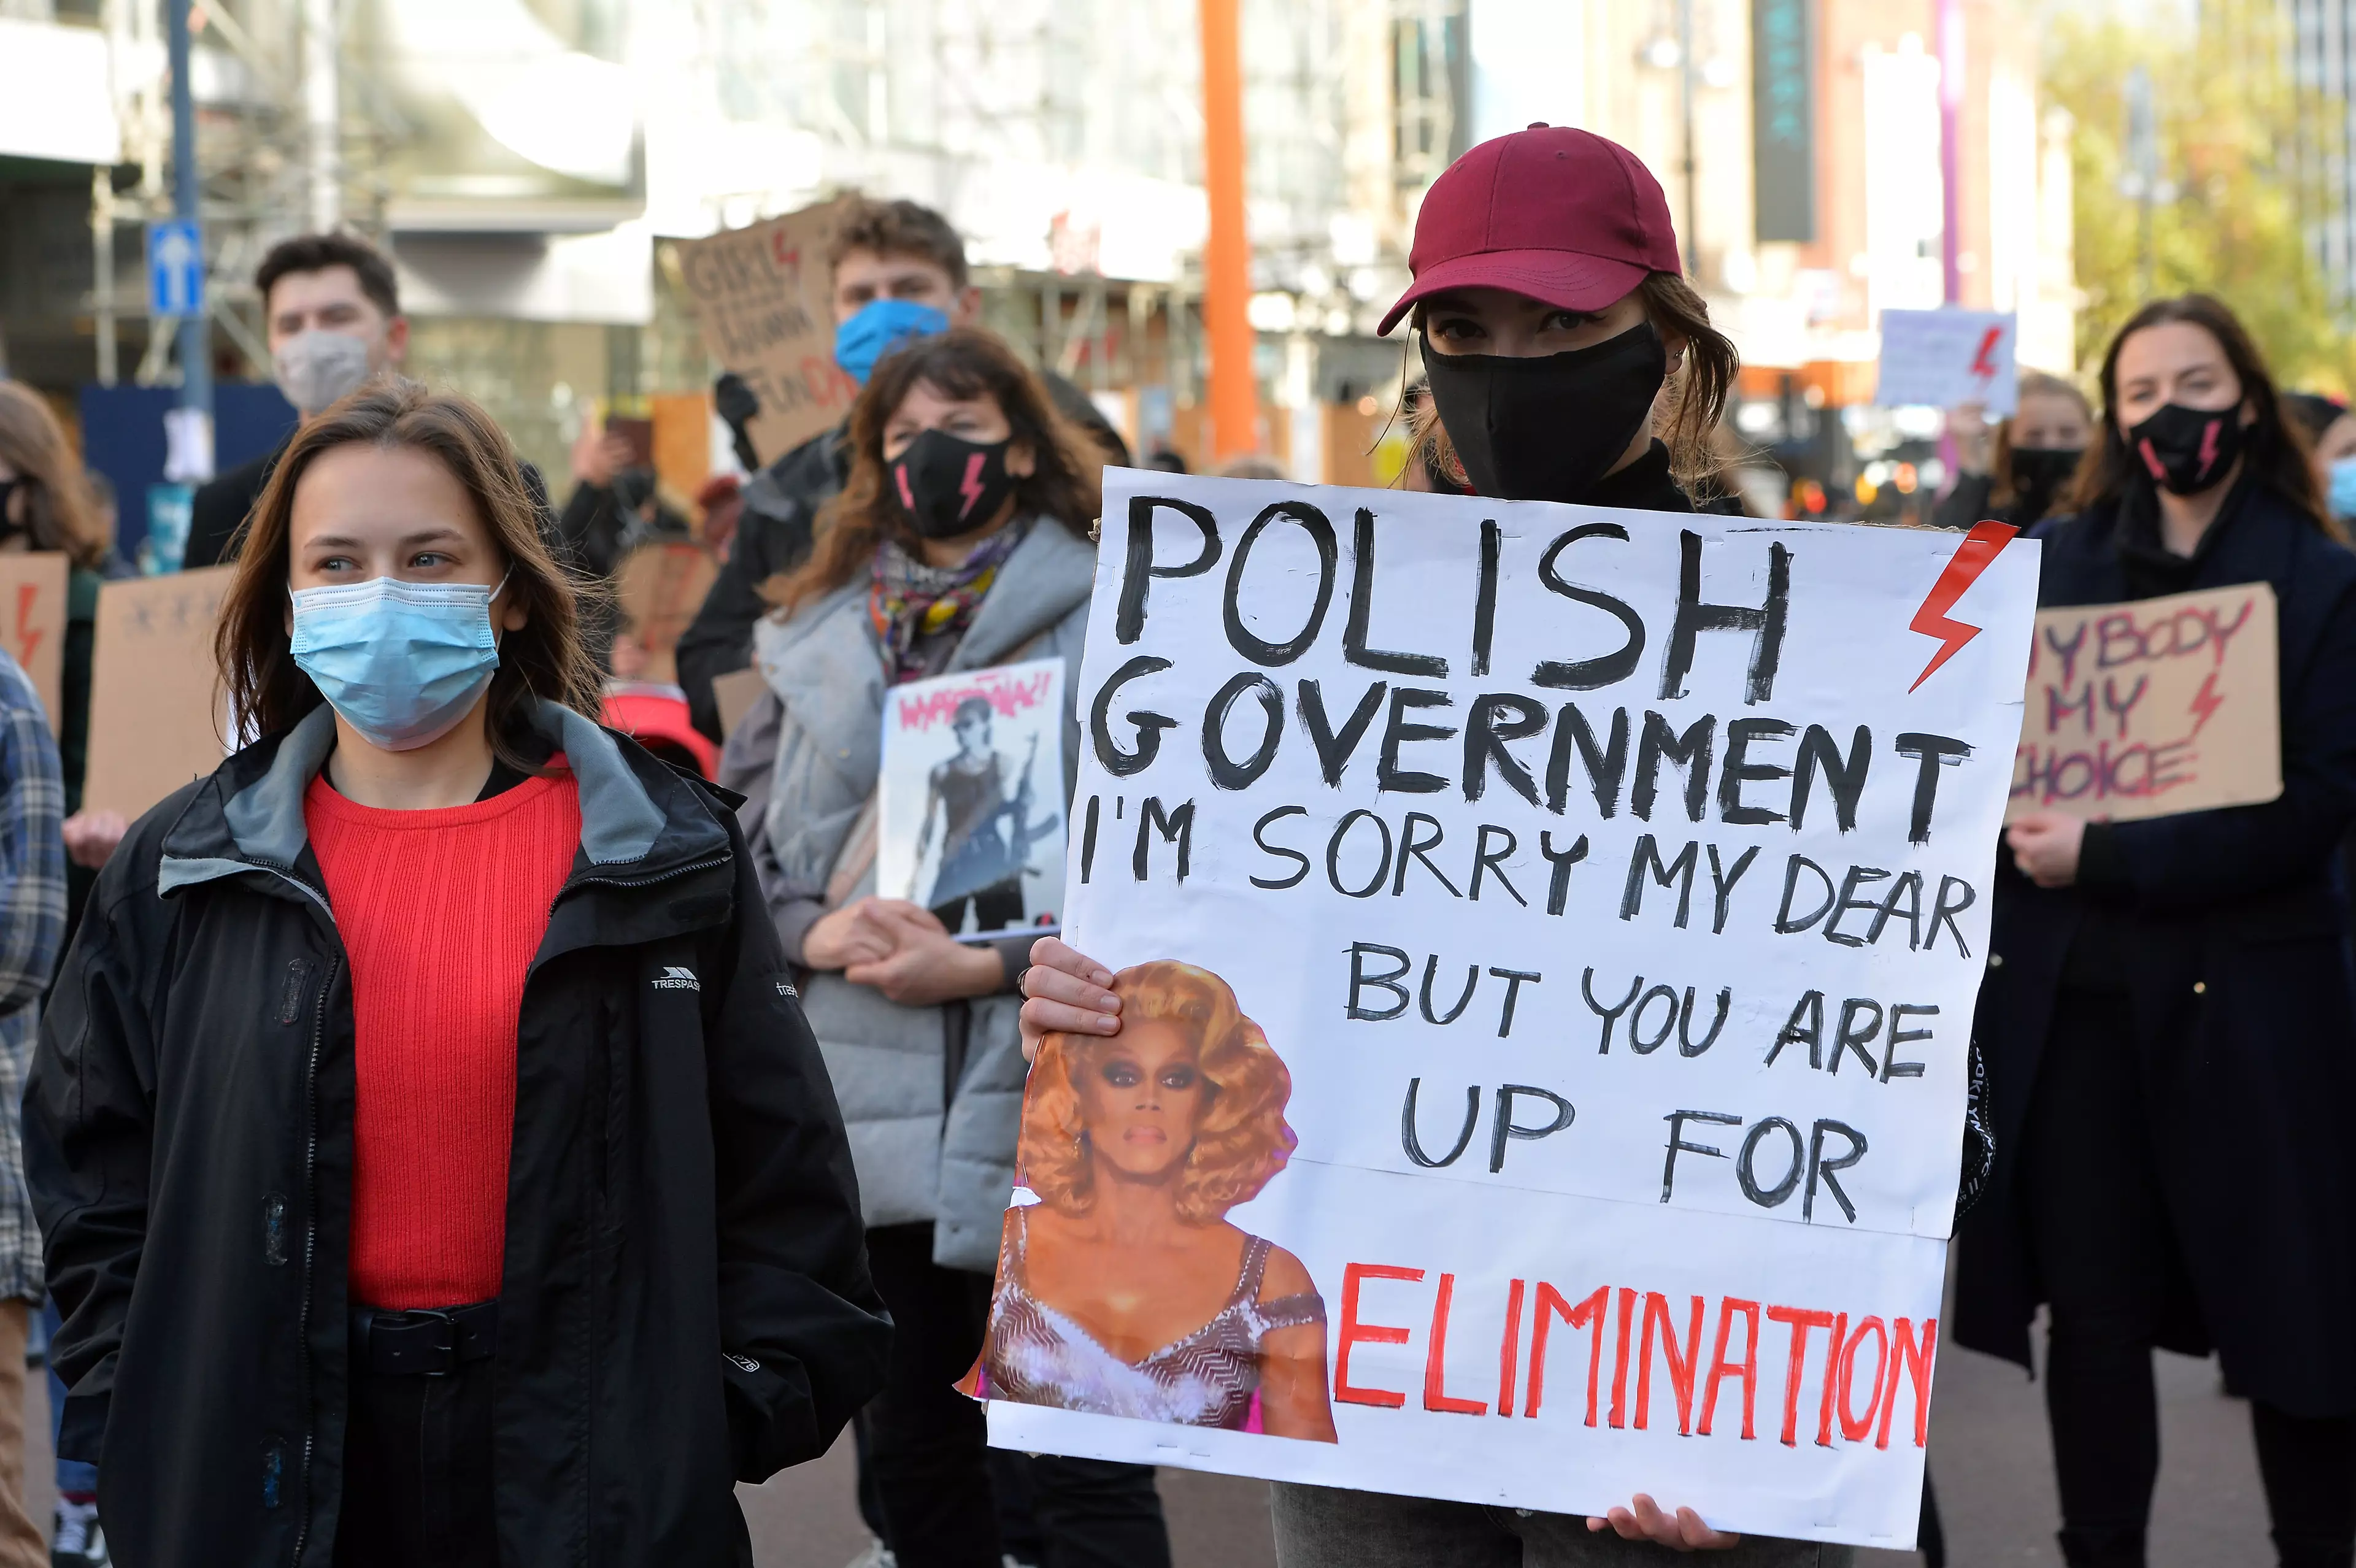 Protestors on the streets of Warsaw (